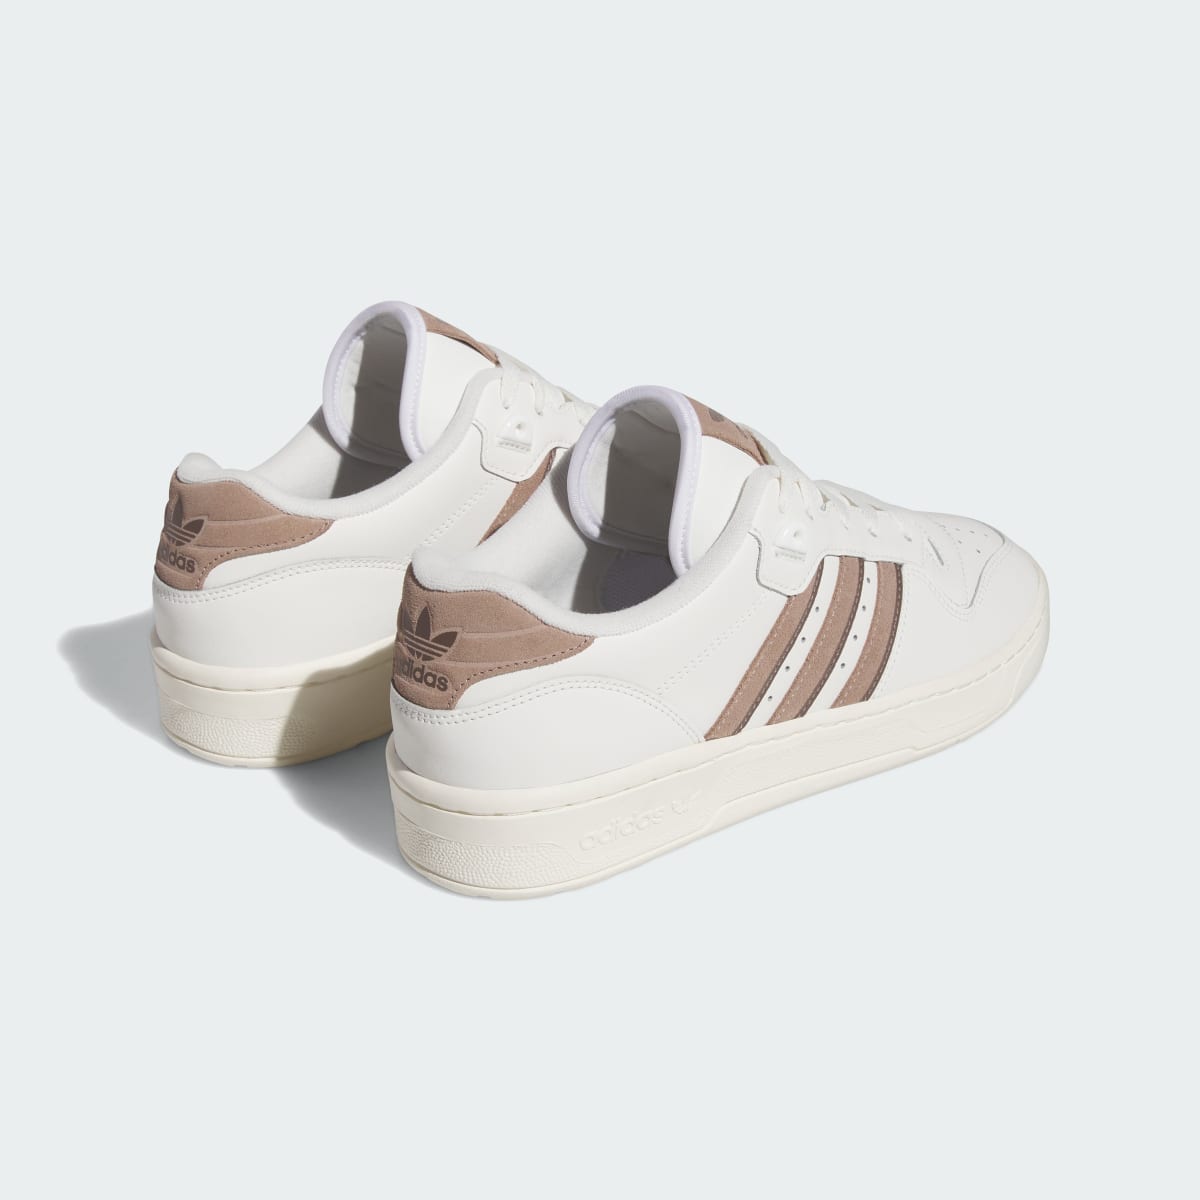 Adidas Rivalry Low Basketball Shoes. 6